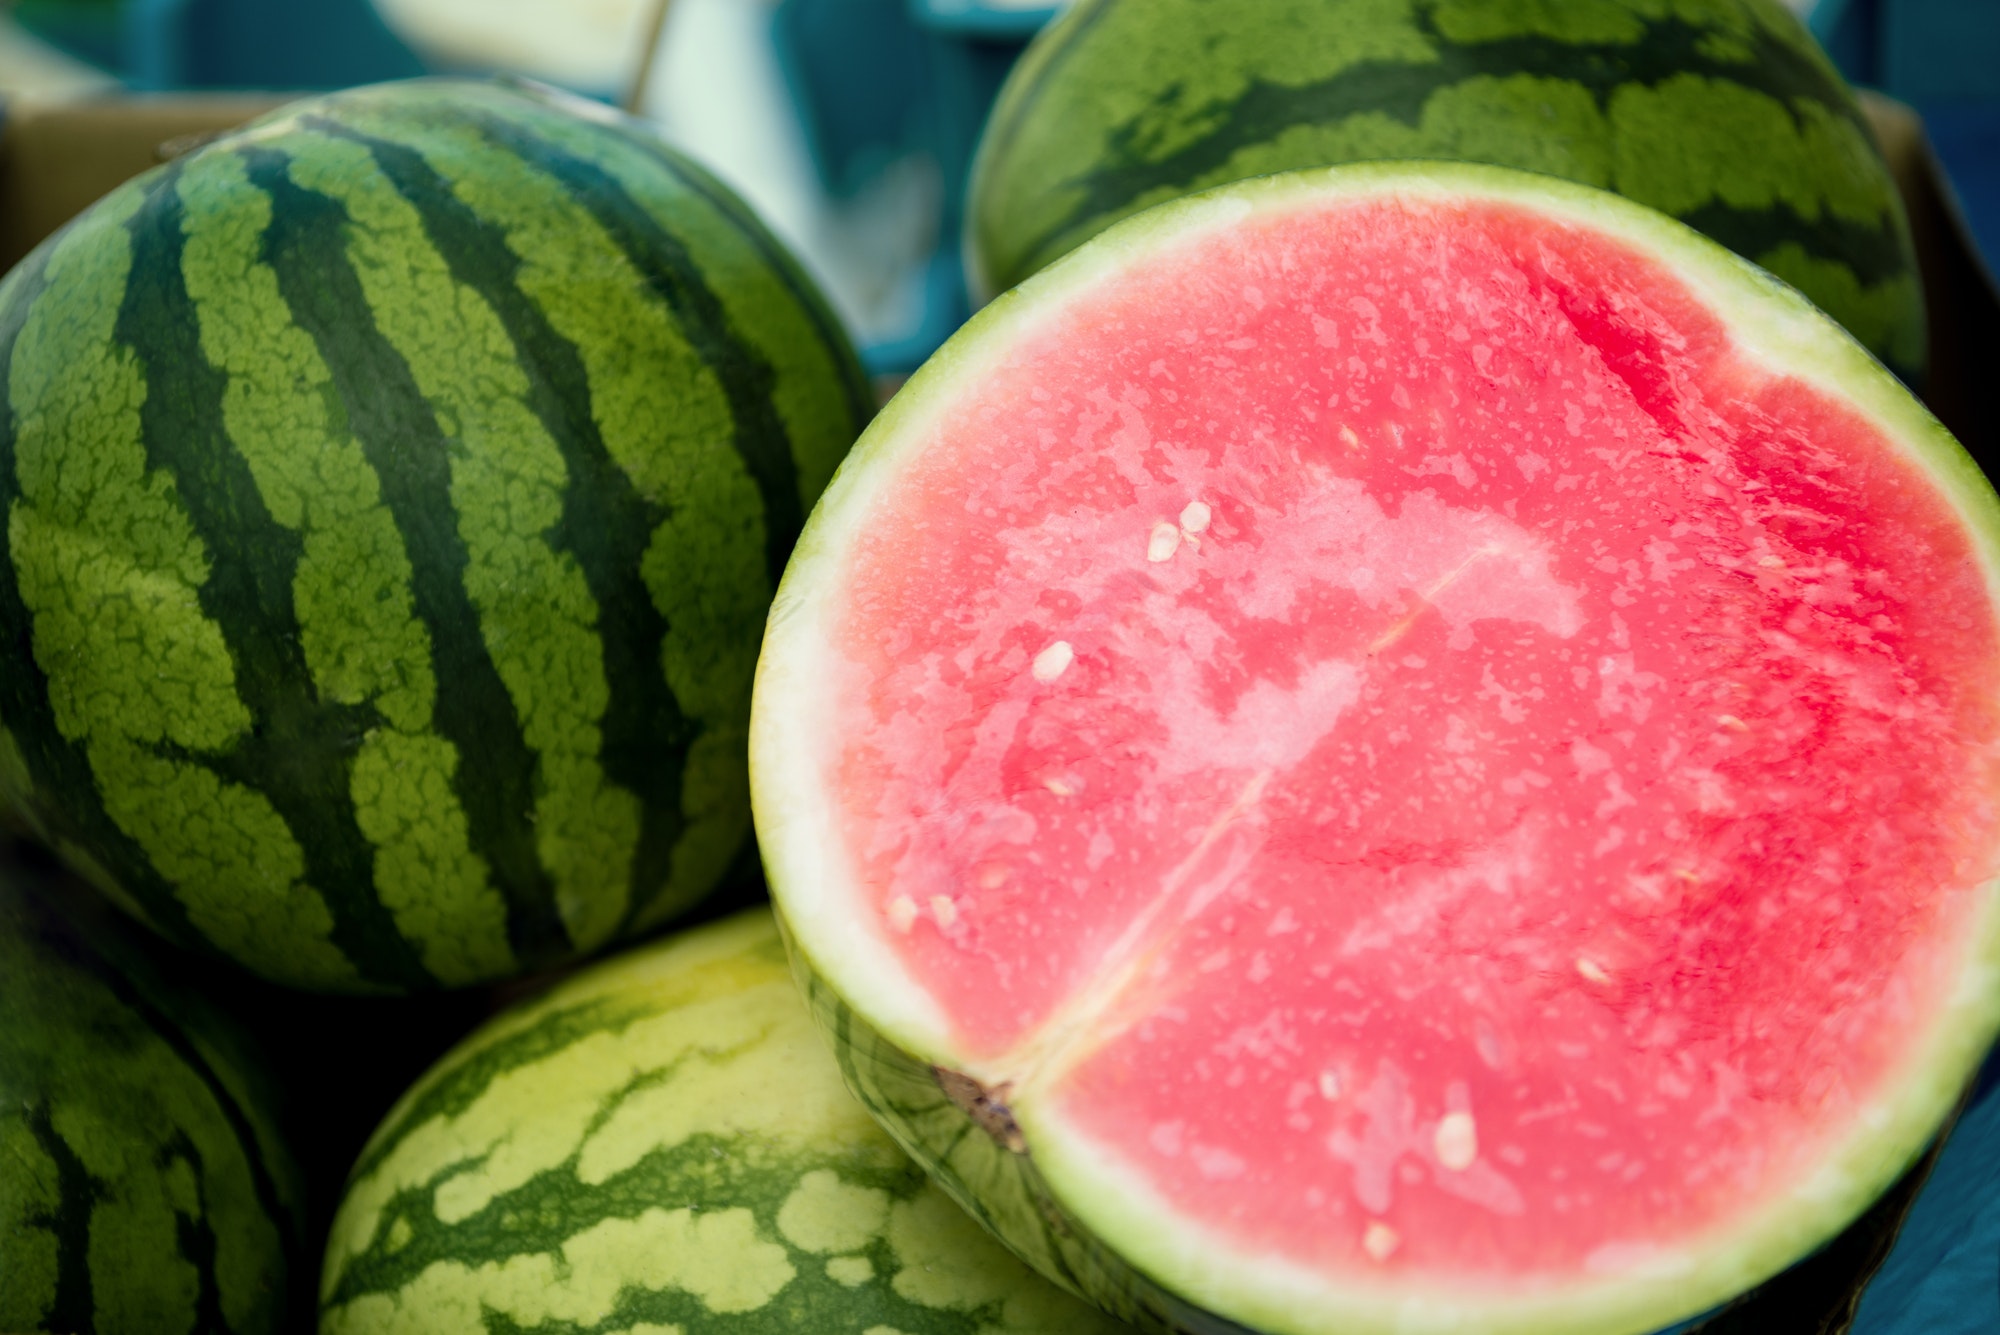 close up view of half of watermelon and watermelons